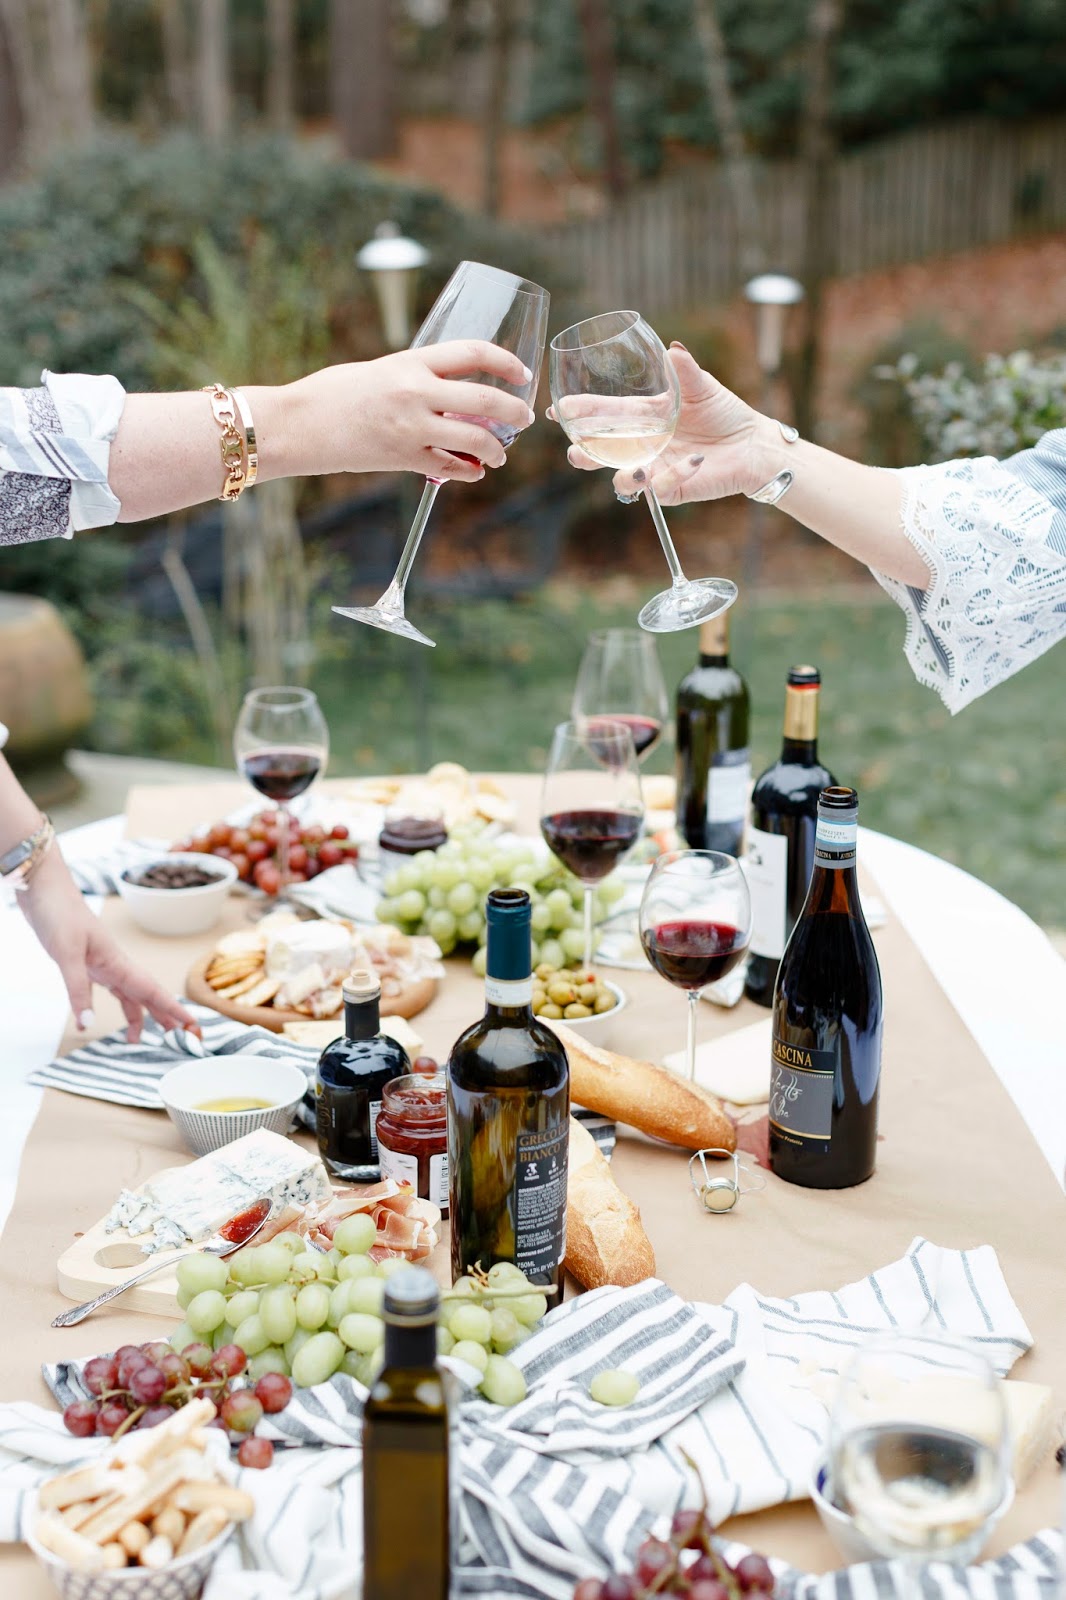 How To Plan a Gorgeous Wine and Cheese Party (without breaking the bank!)